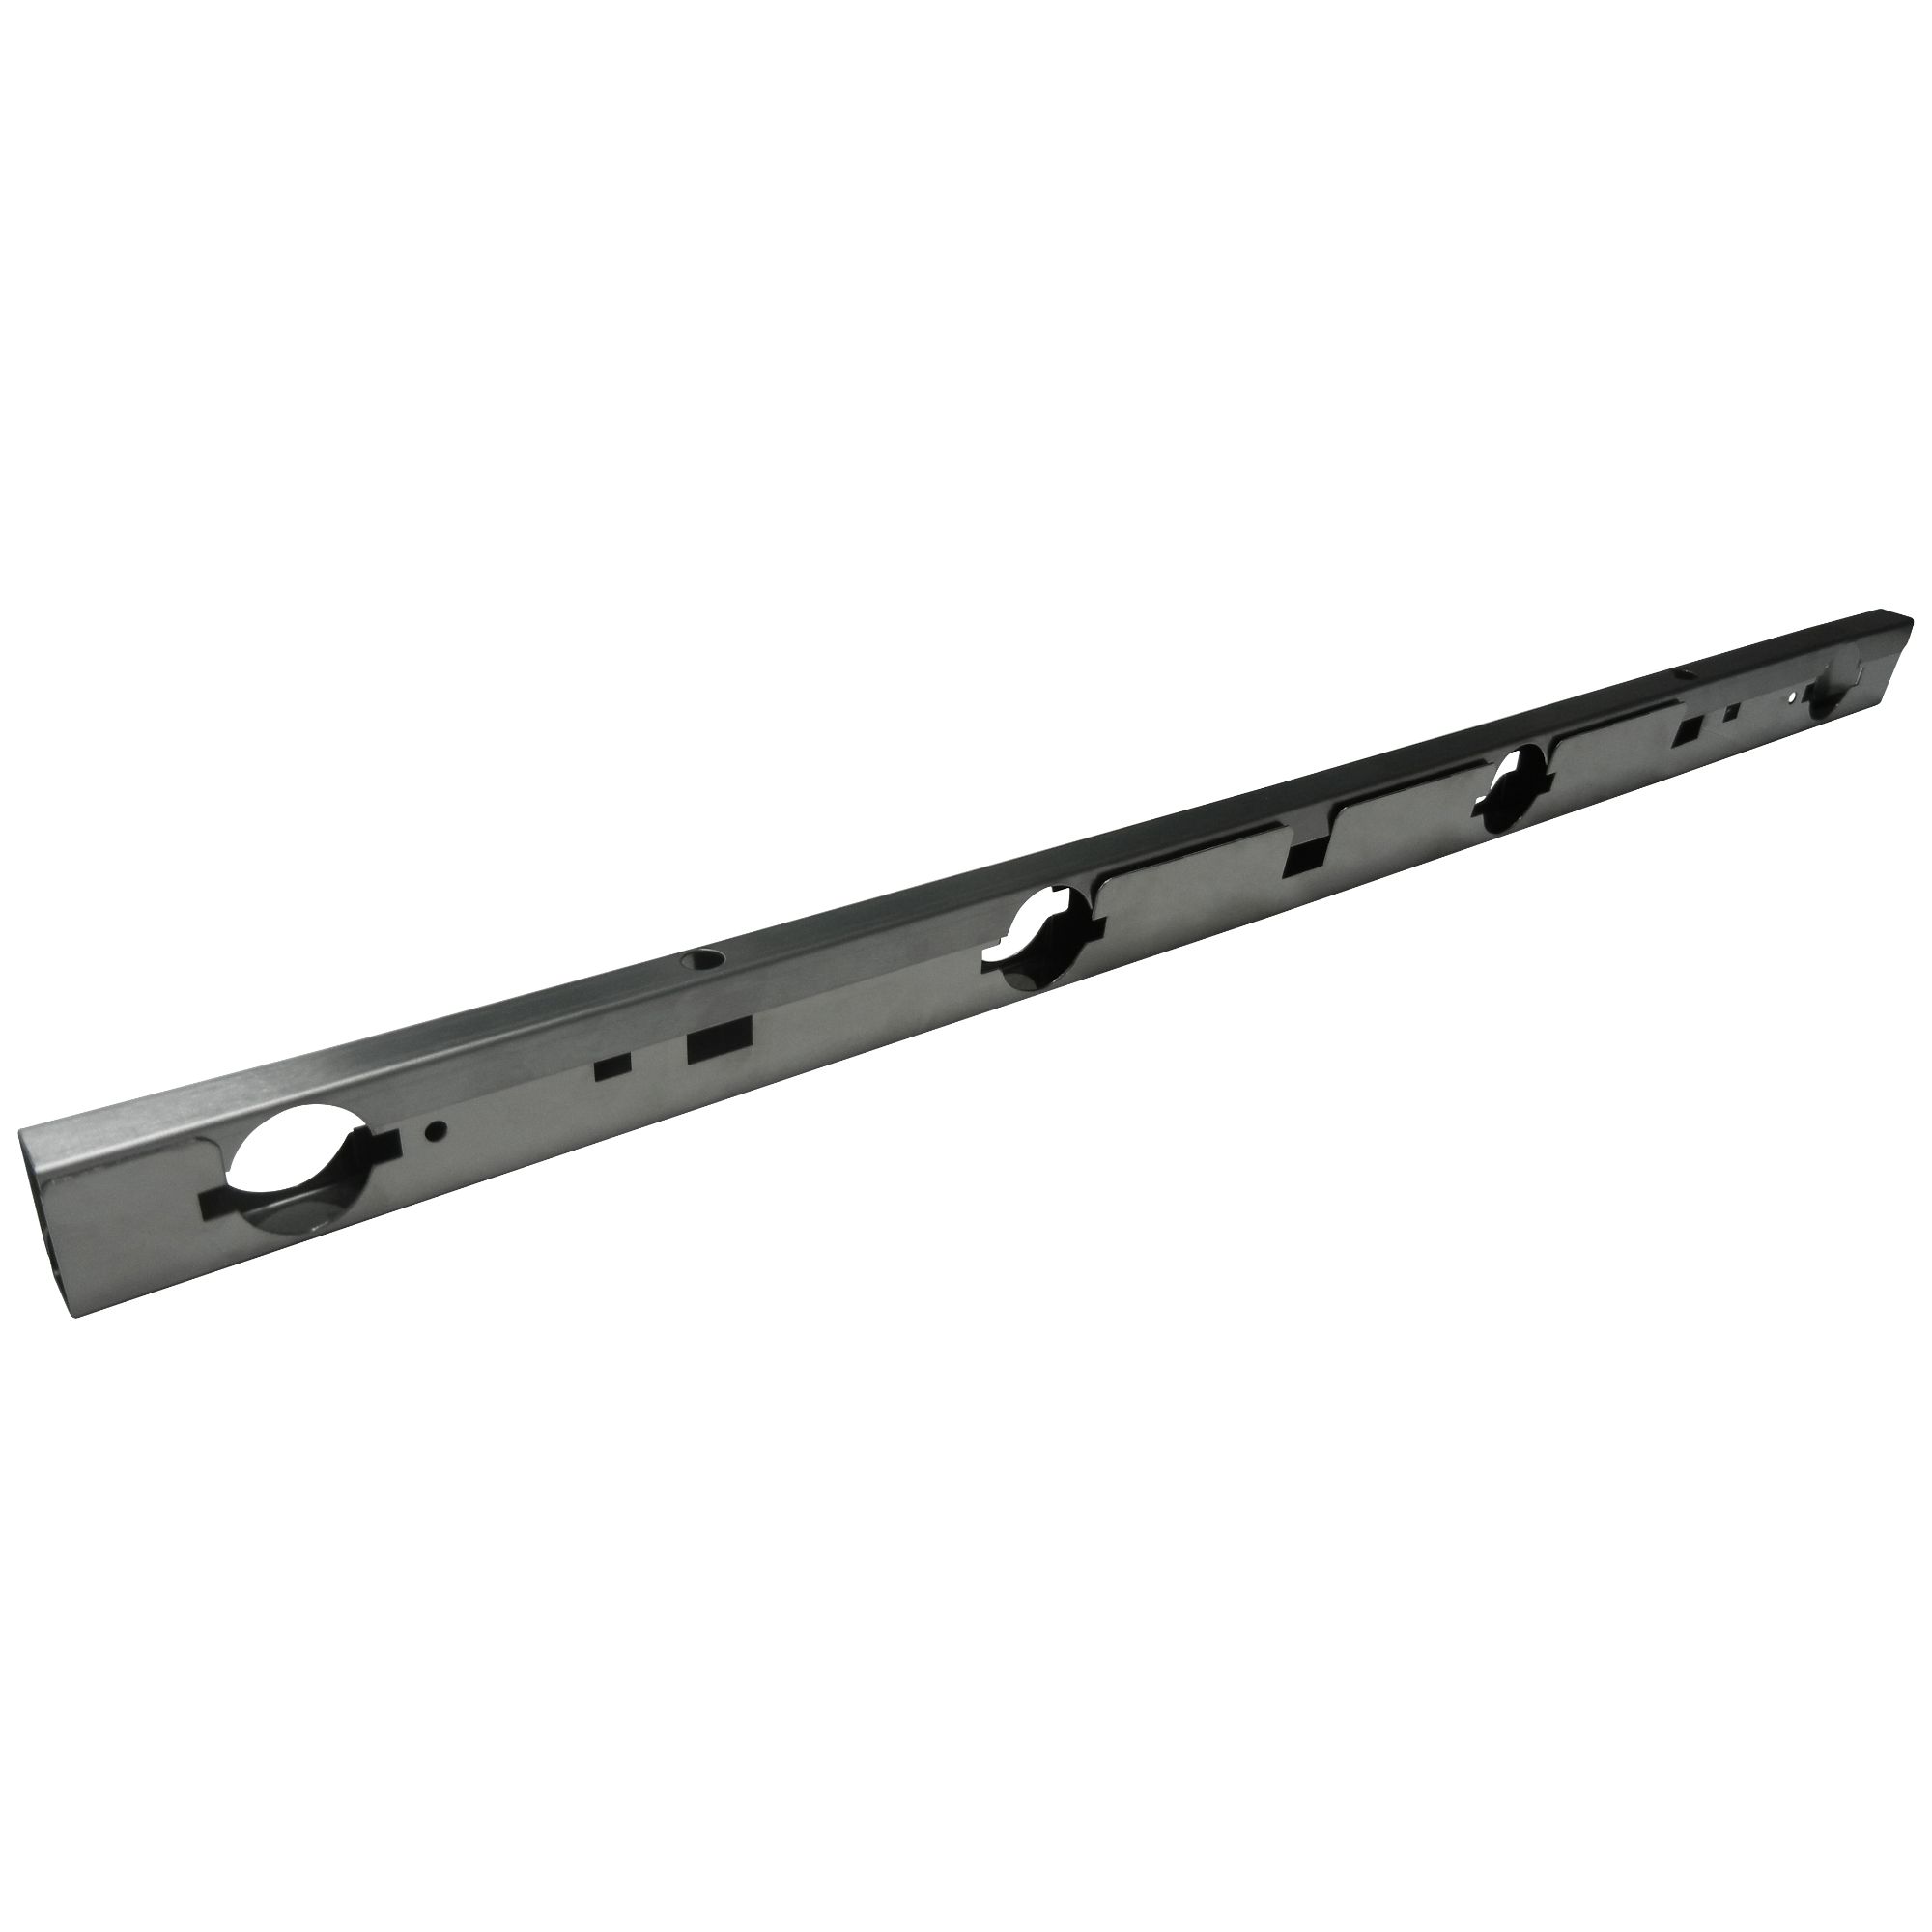 29.25" Stainless Steel Cross Over Burner for Features a gas grills stainless steel burner for Mr. Steak Gas Grills - image 1 of 2